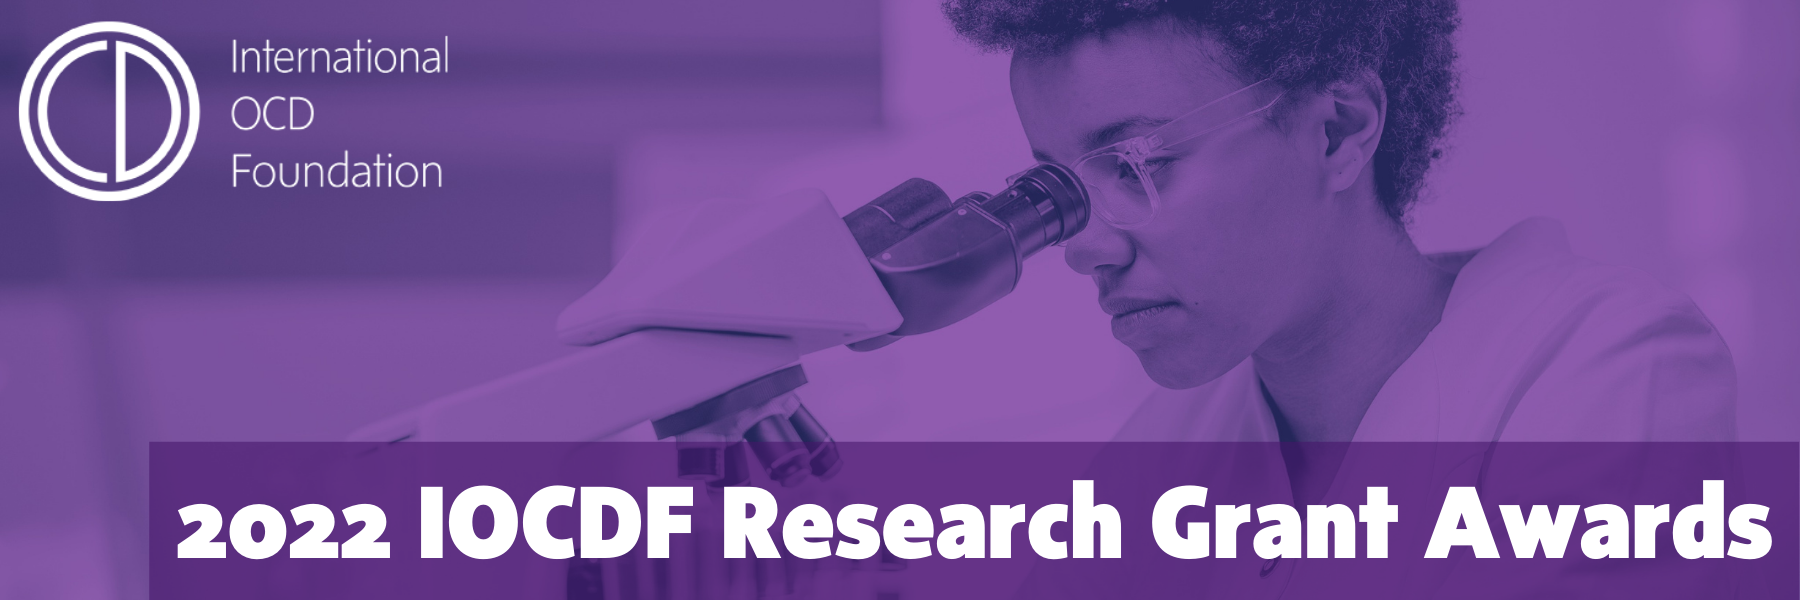 2022 IOCDF Research Grant Awards (6)